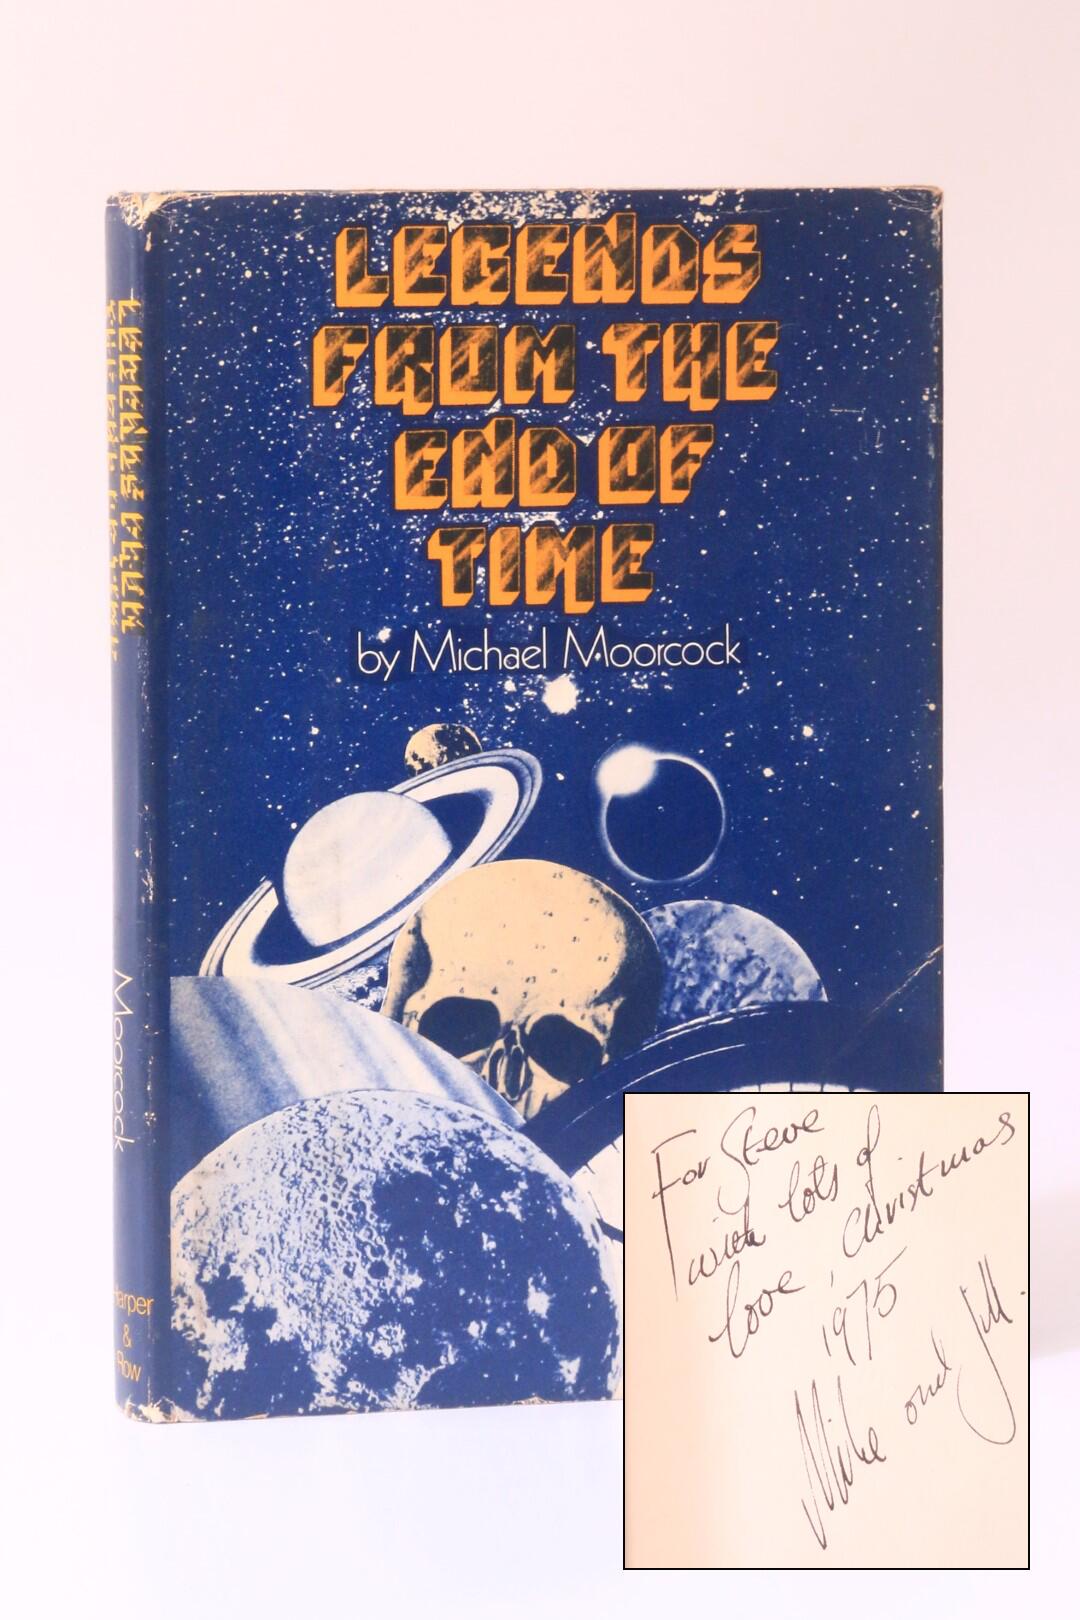 Michael Moorcock - Legends from the End of Time - Harper & Row, 1976, Signed First Edition.